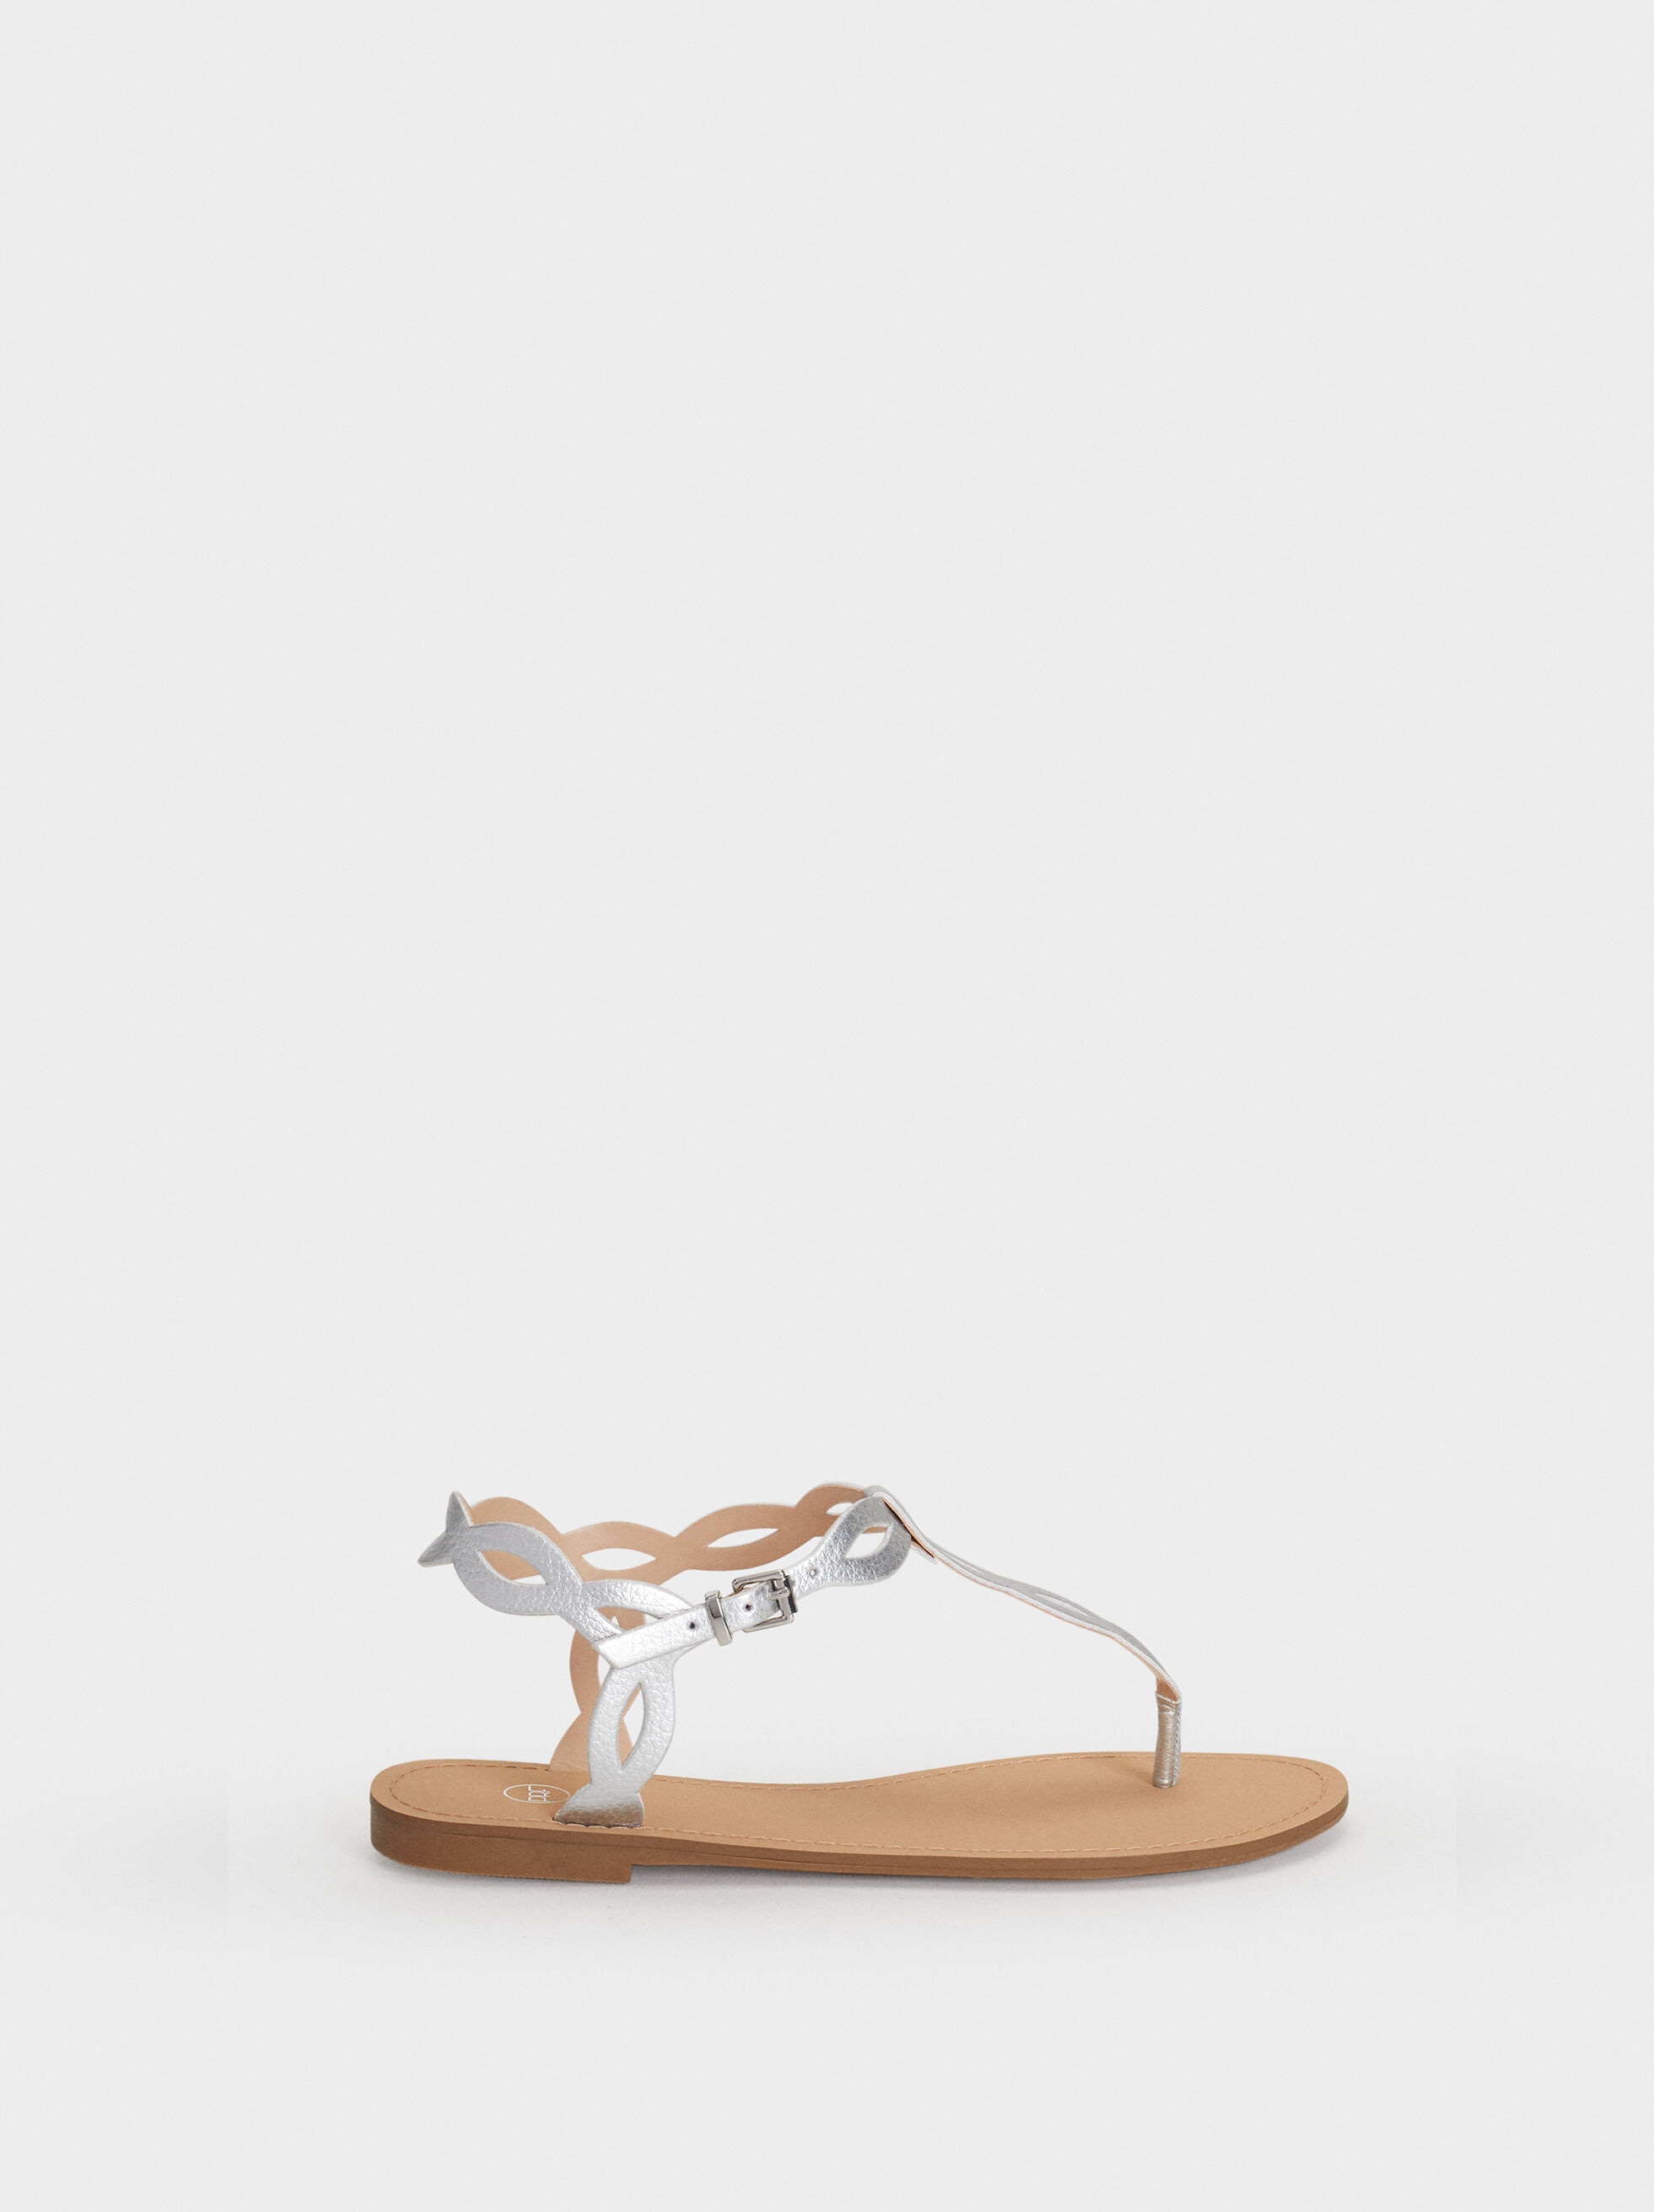 Flat Strappy Sandals - Golden - Woman 